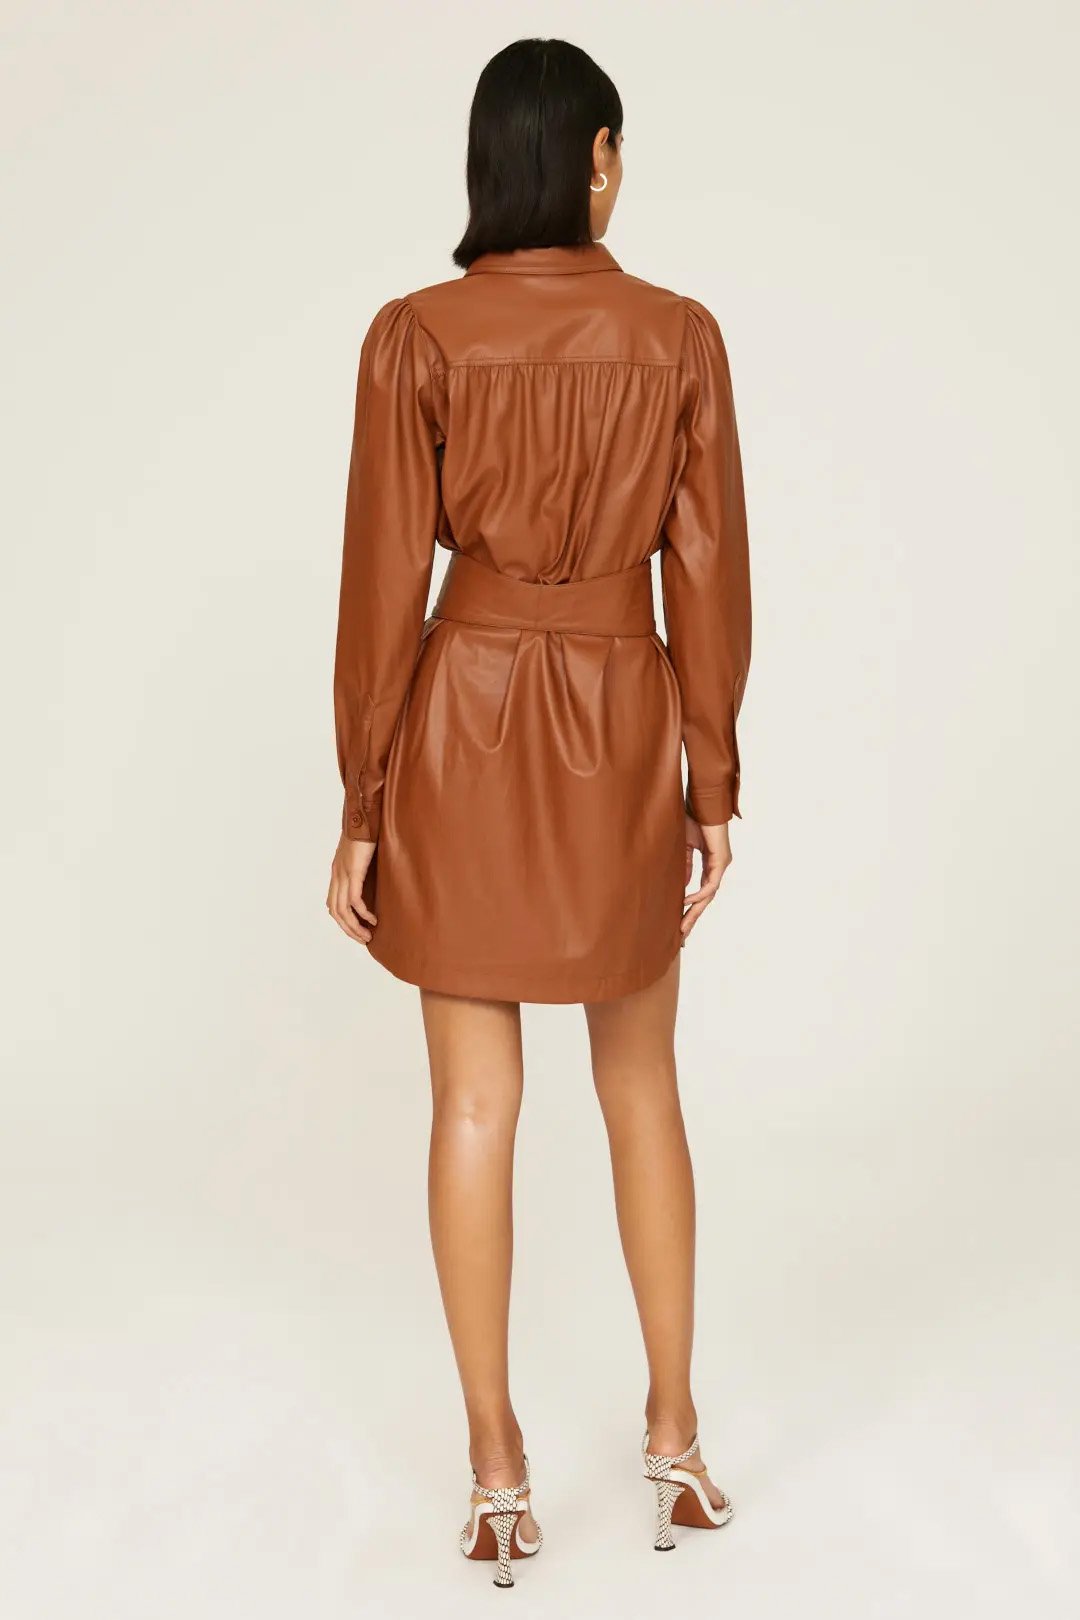 Brown Faux Leather Shirtdress rent the runway (Copy)